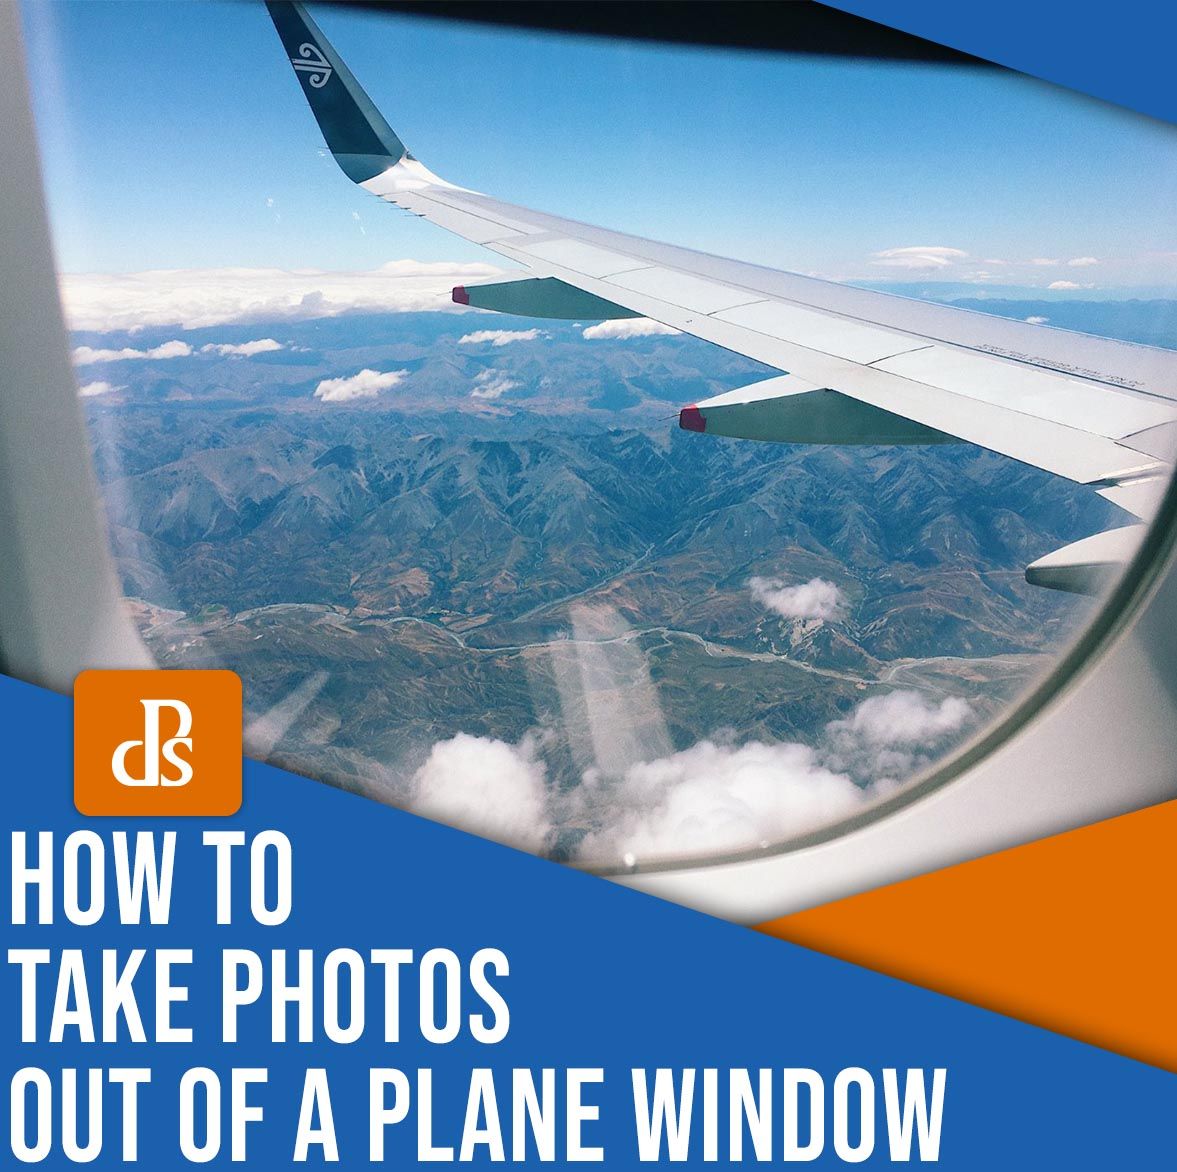 How to Take Photo Out of a Plane Window (6 Tips)